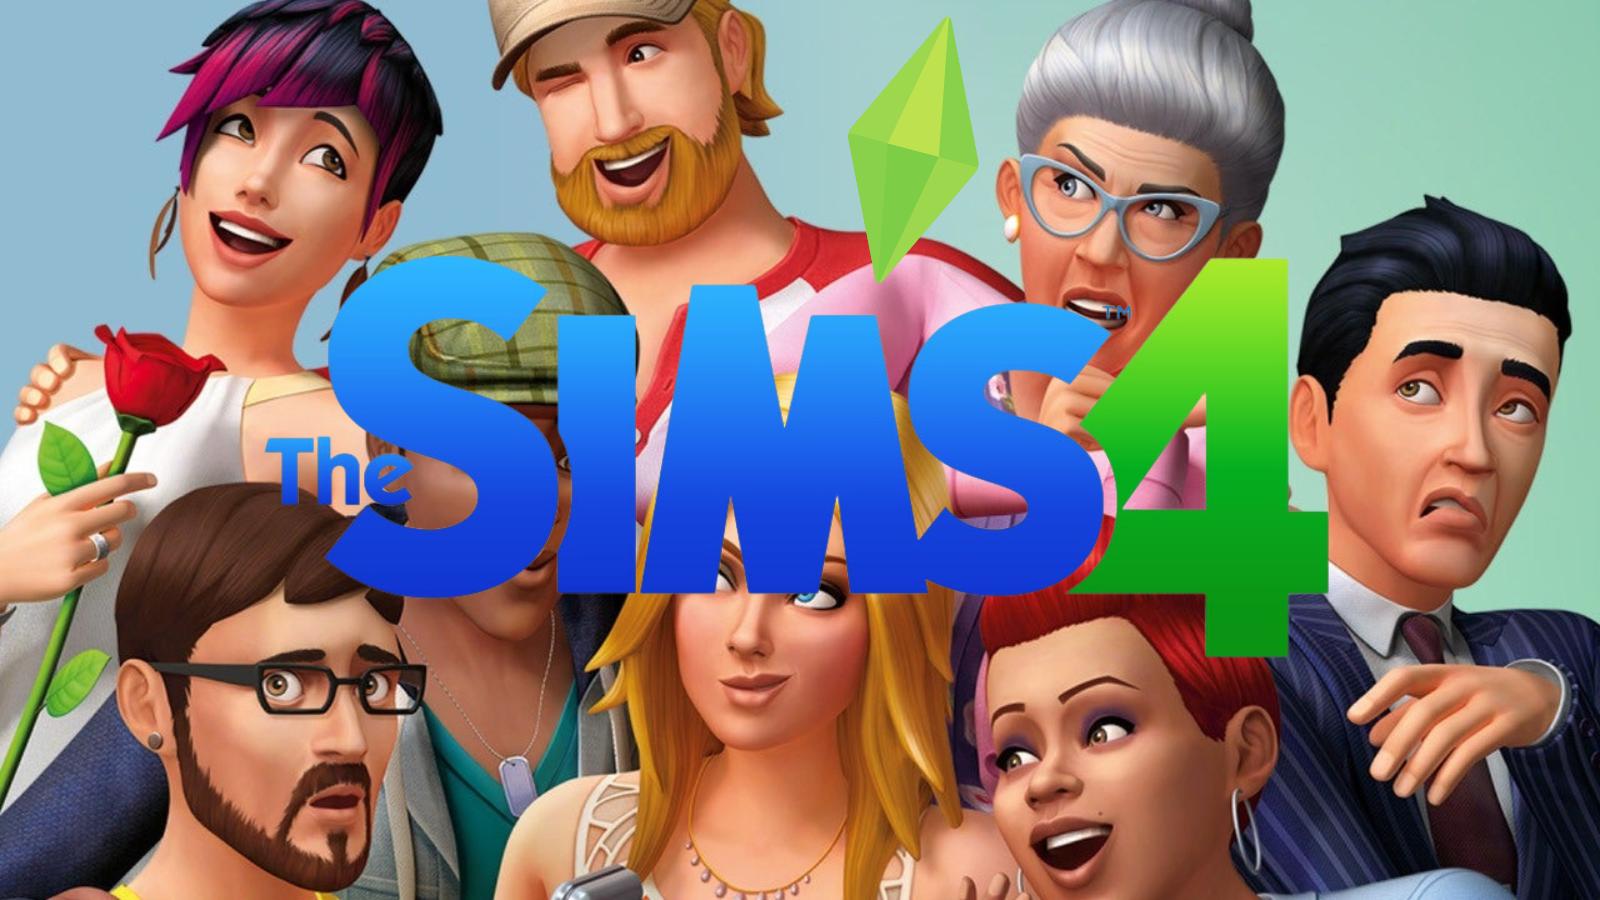 Create Your Sim demo for The Sims 4 available for free